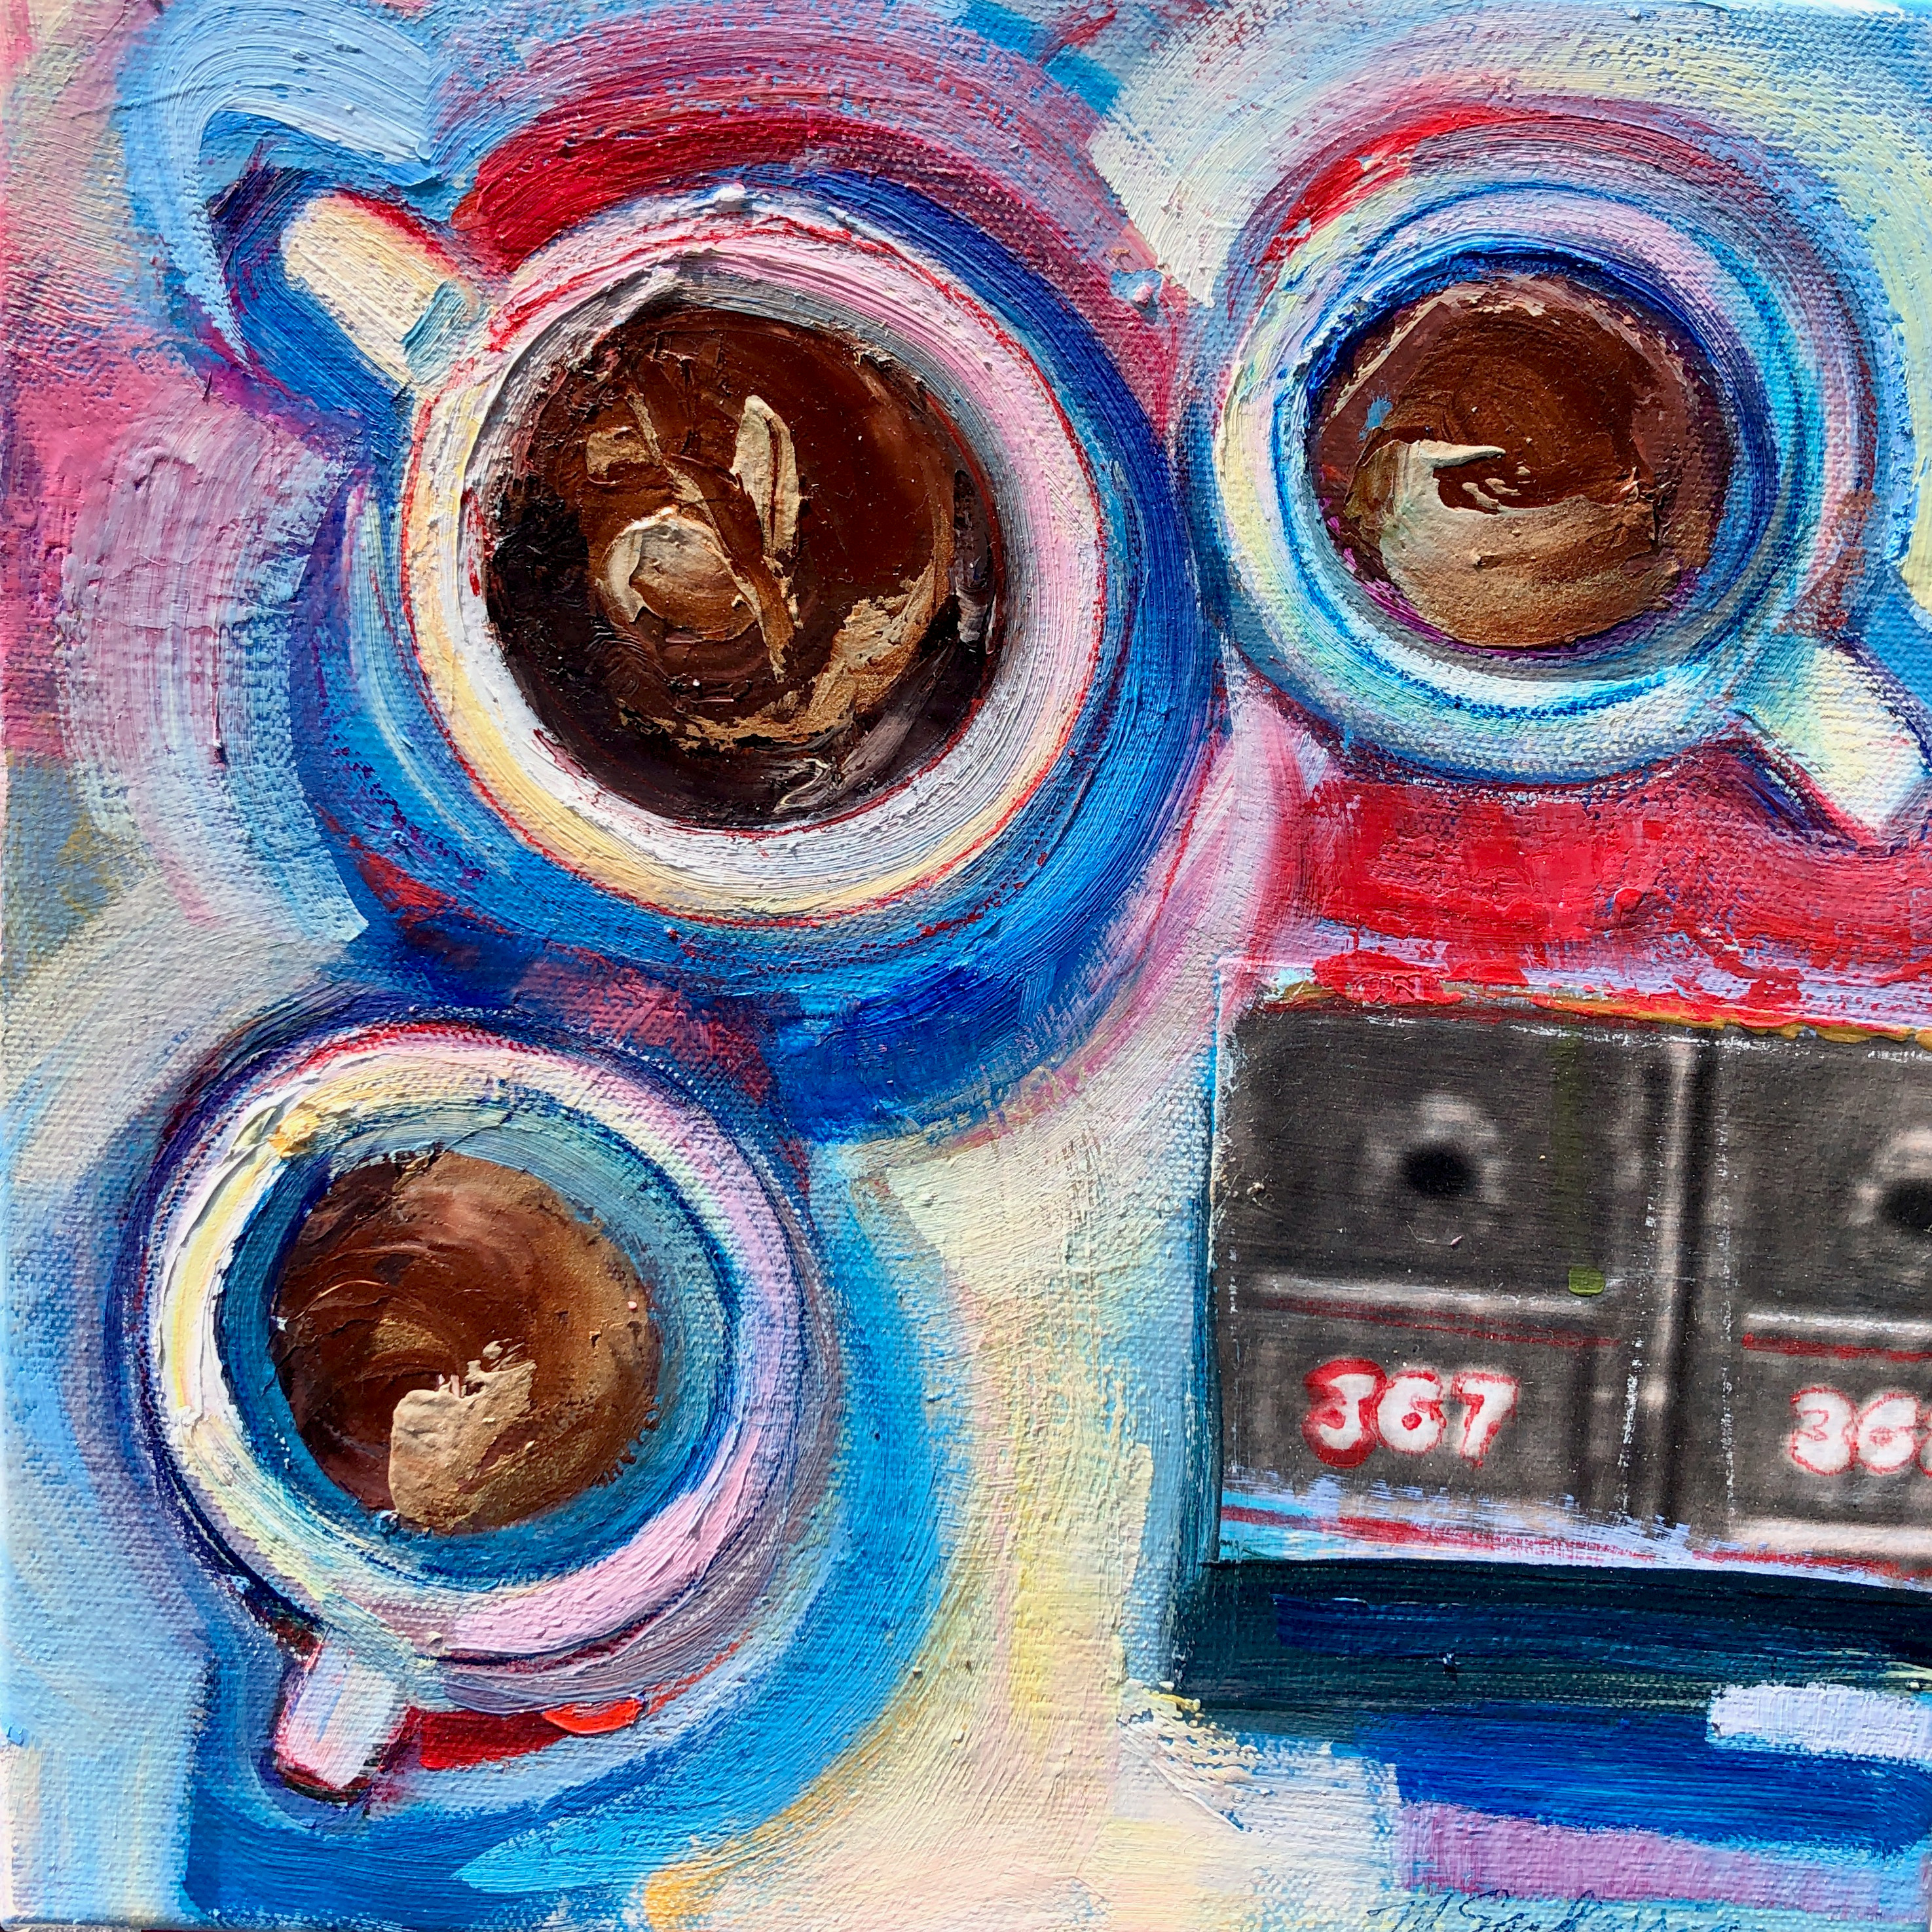 Times of refreshment 367 368 oil on canvas 10x10 c4csyz